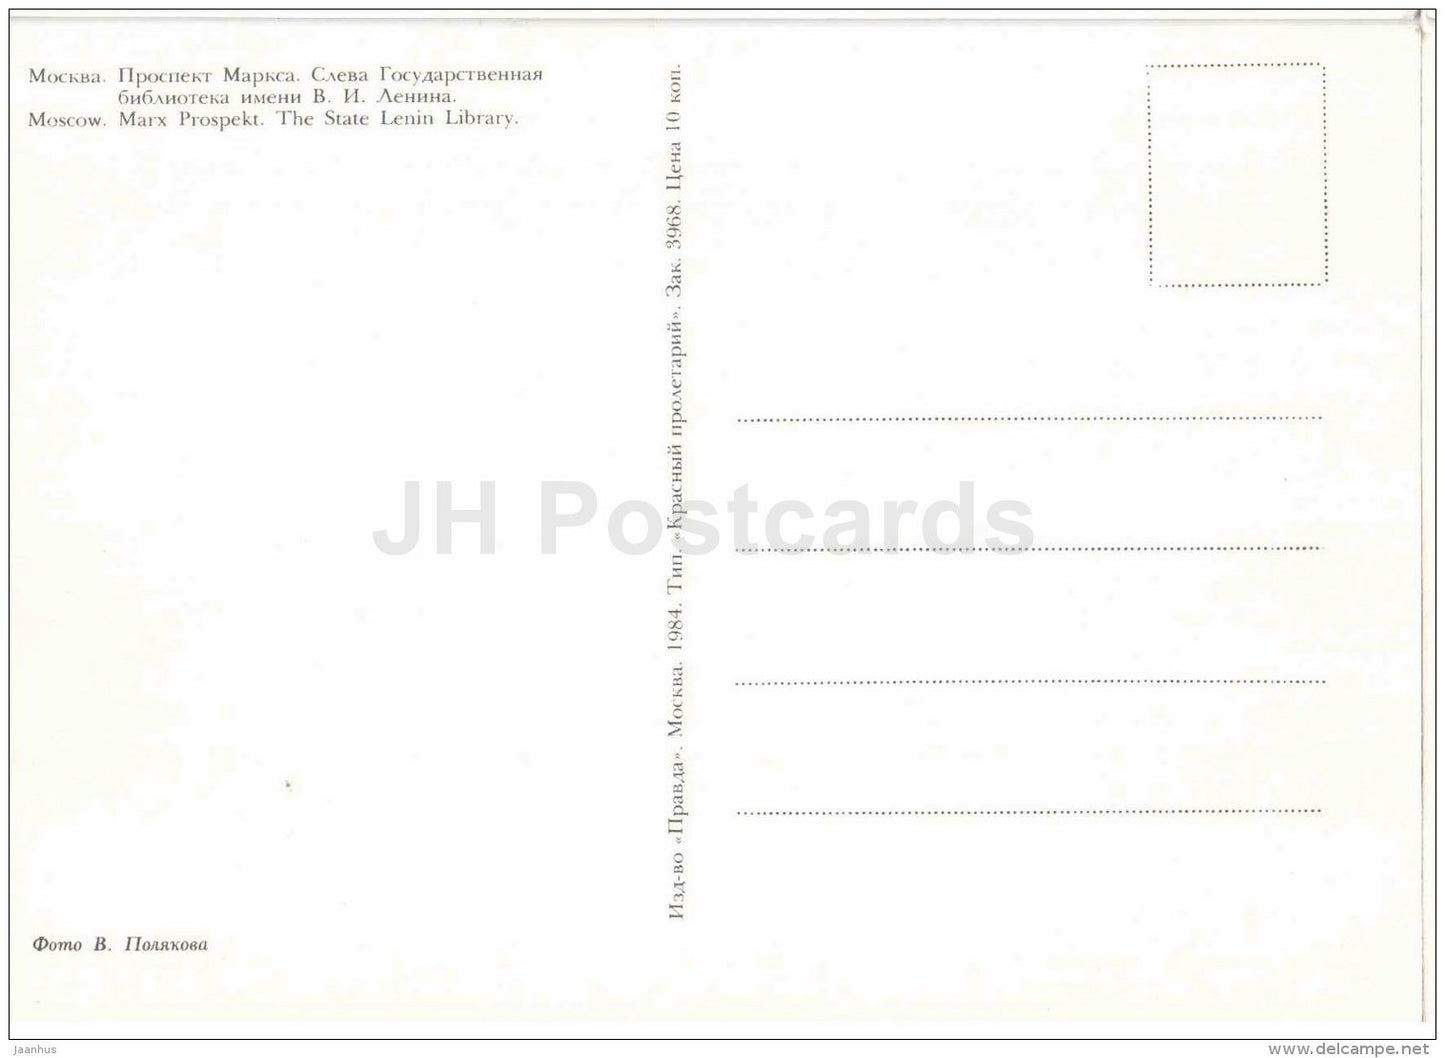 Marx Prospekt . The State Lenin Library - Moscow - 1984 - Russia USSR - unused - JH Postcards